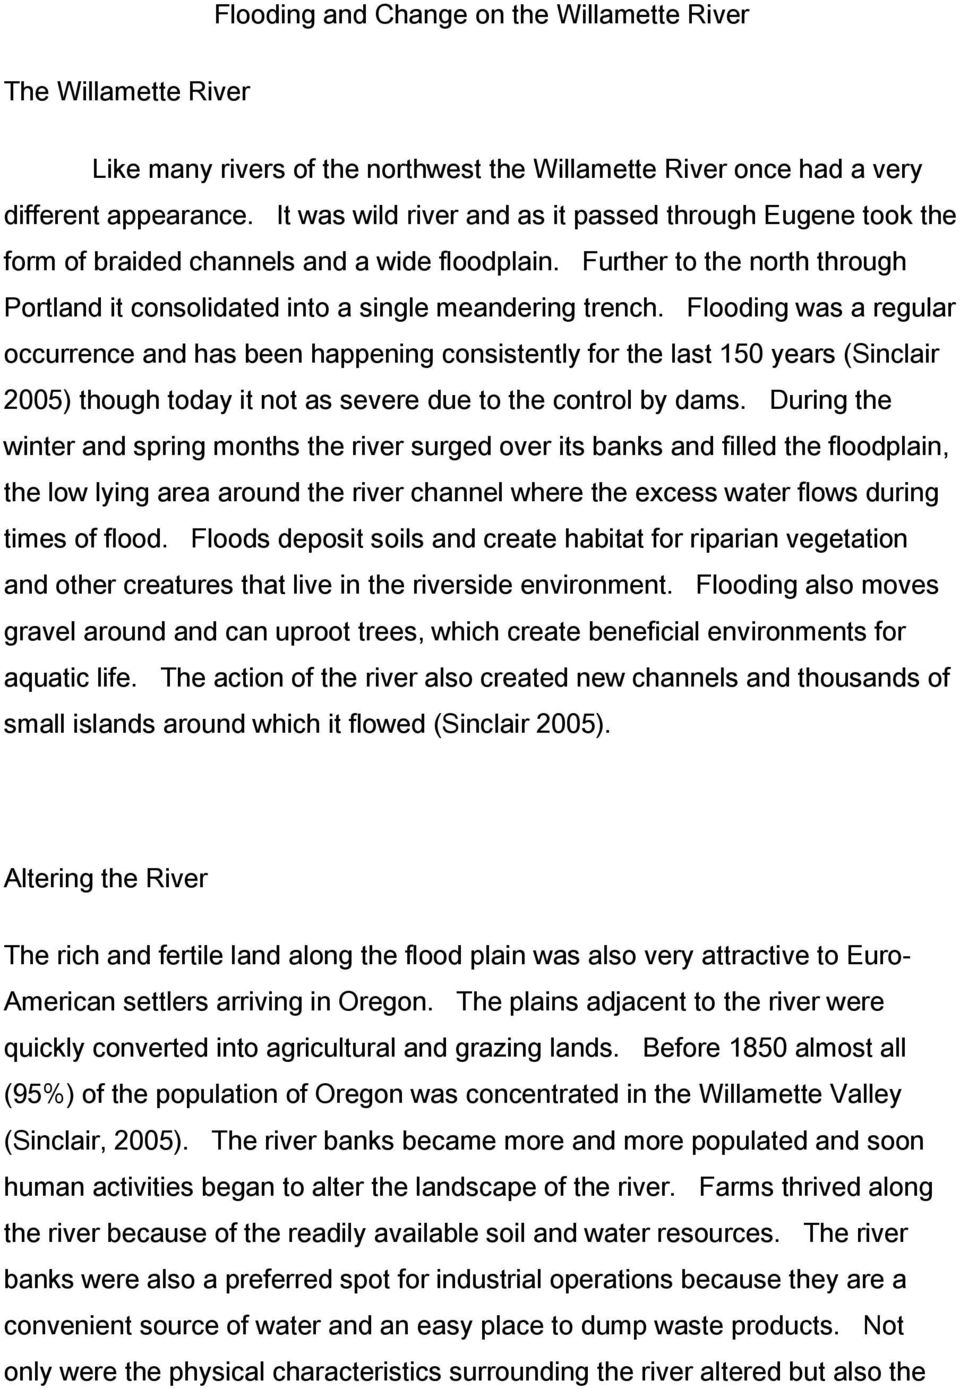 Flooding was a regular occurrence and has been happening consistently for the last 150 years (Sinclair 2005) though today it not as severe due to the control by dams.